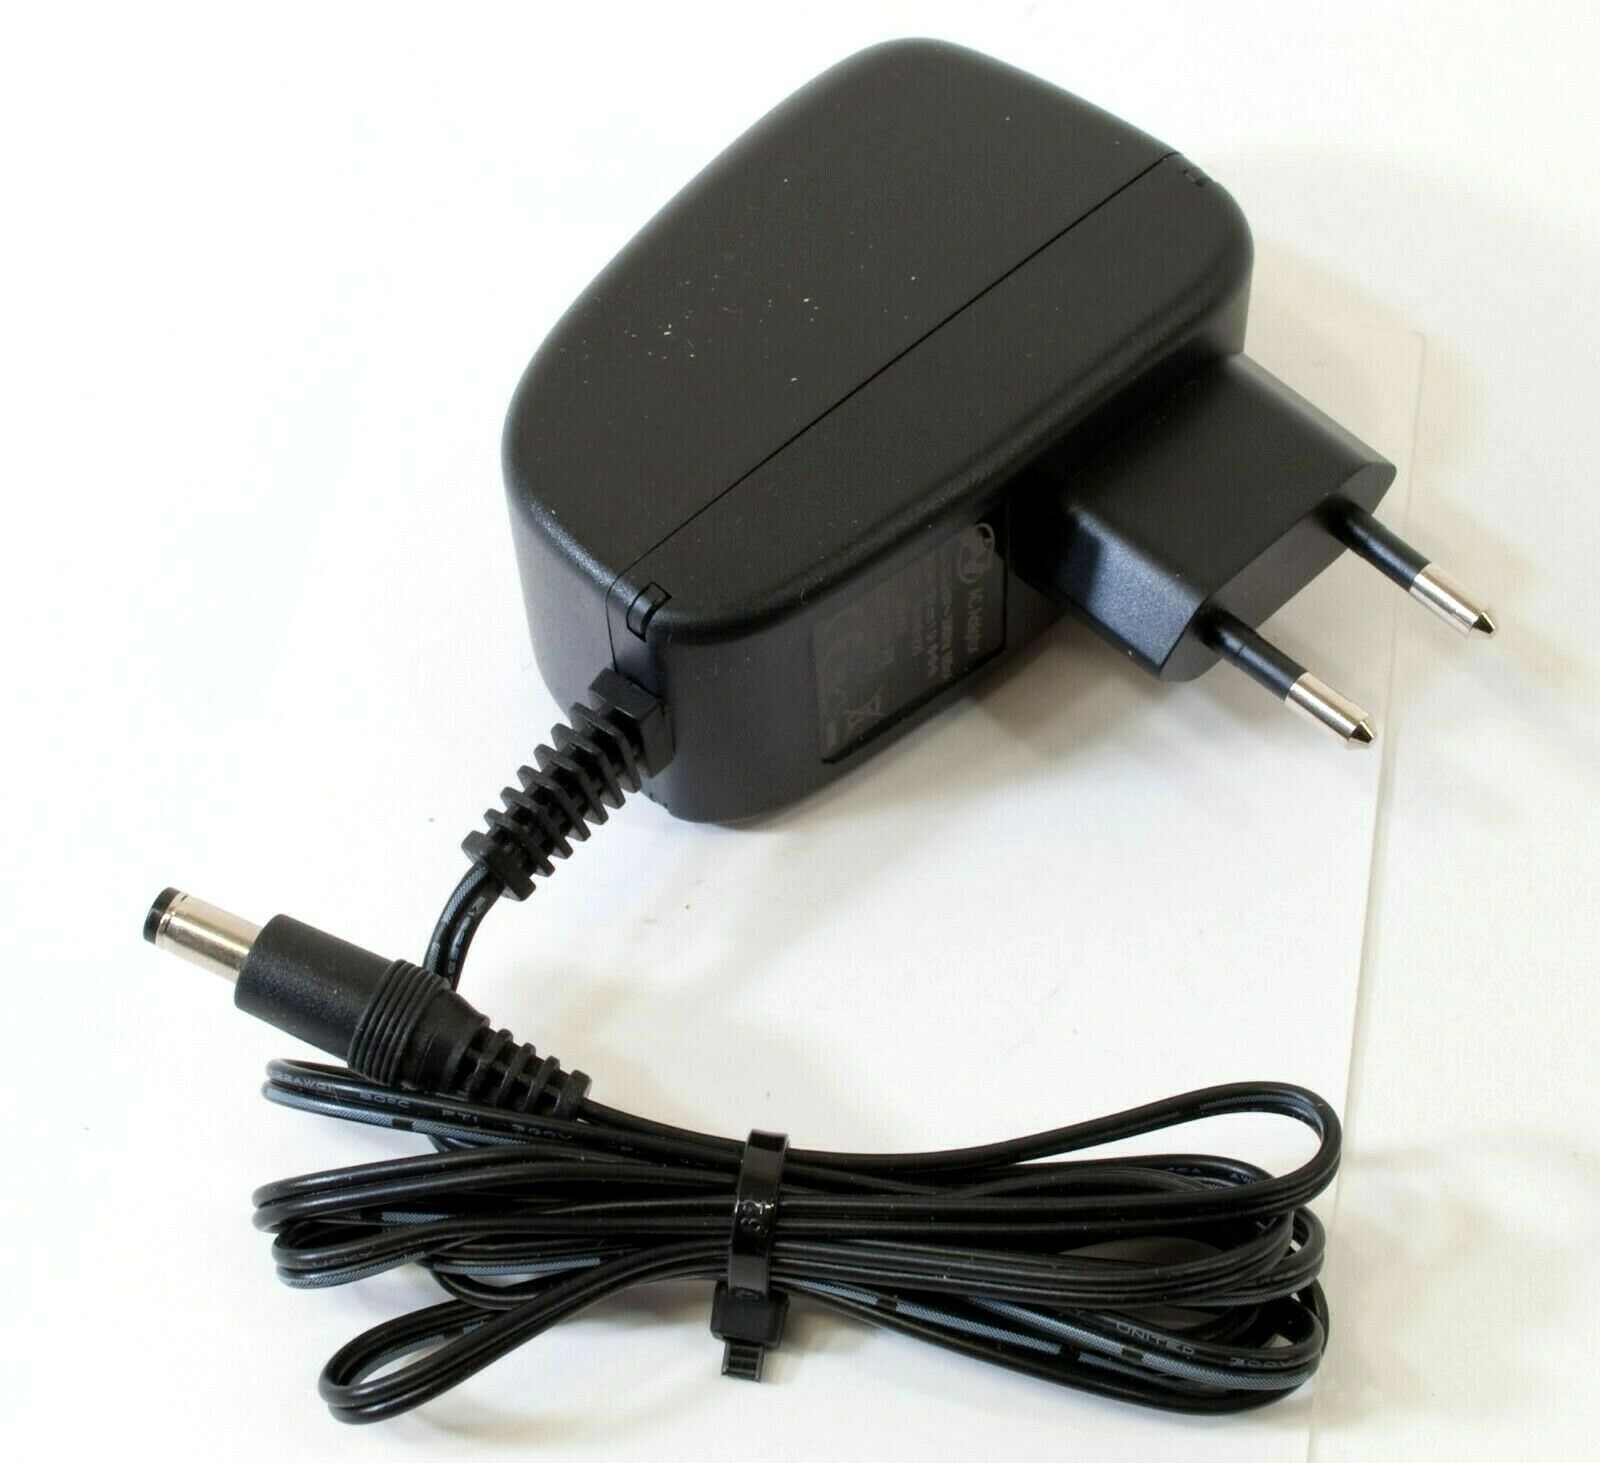 SIL VD060060I AC Adapter 6V 600mA Original Charger Power Supply Europlug Output Current: 600 mA Type: Unit MPN: VD0